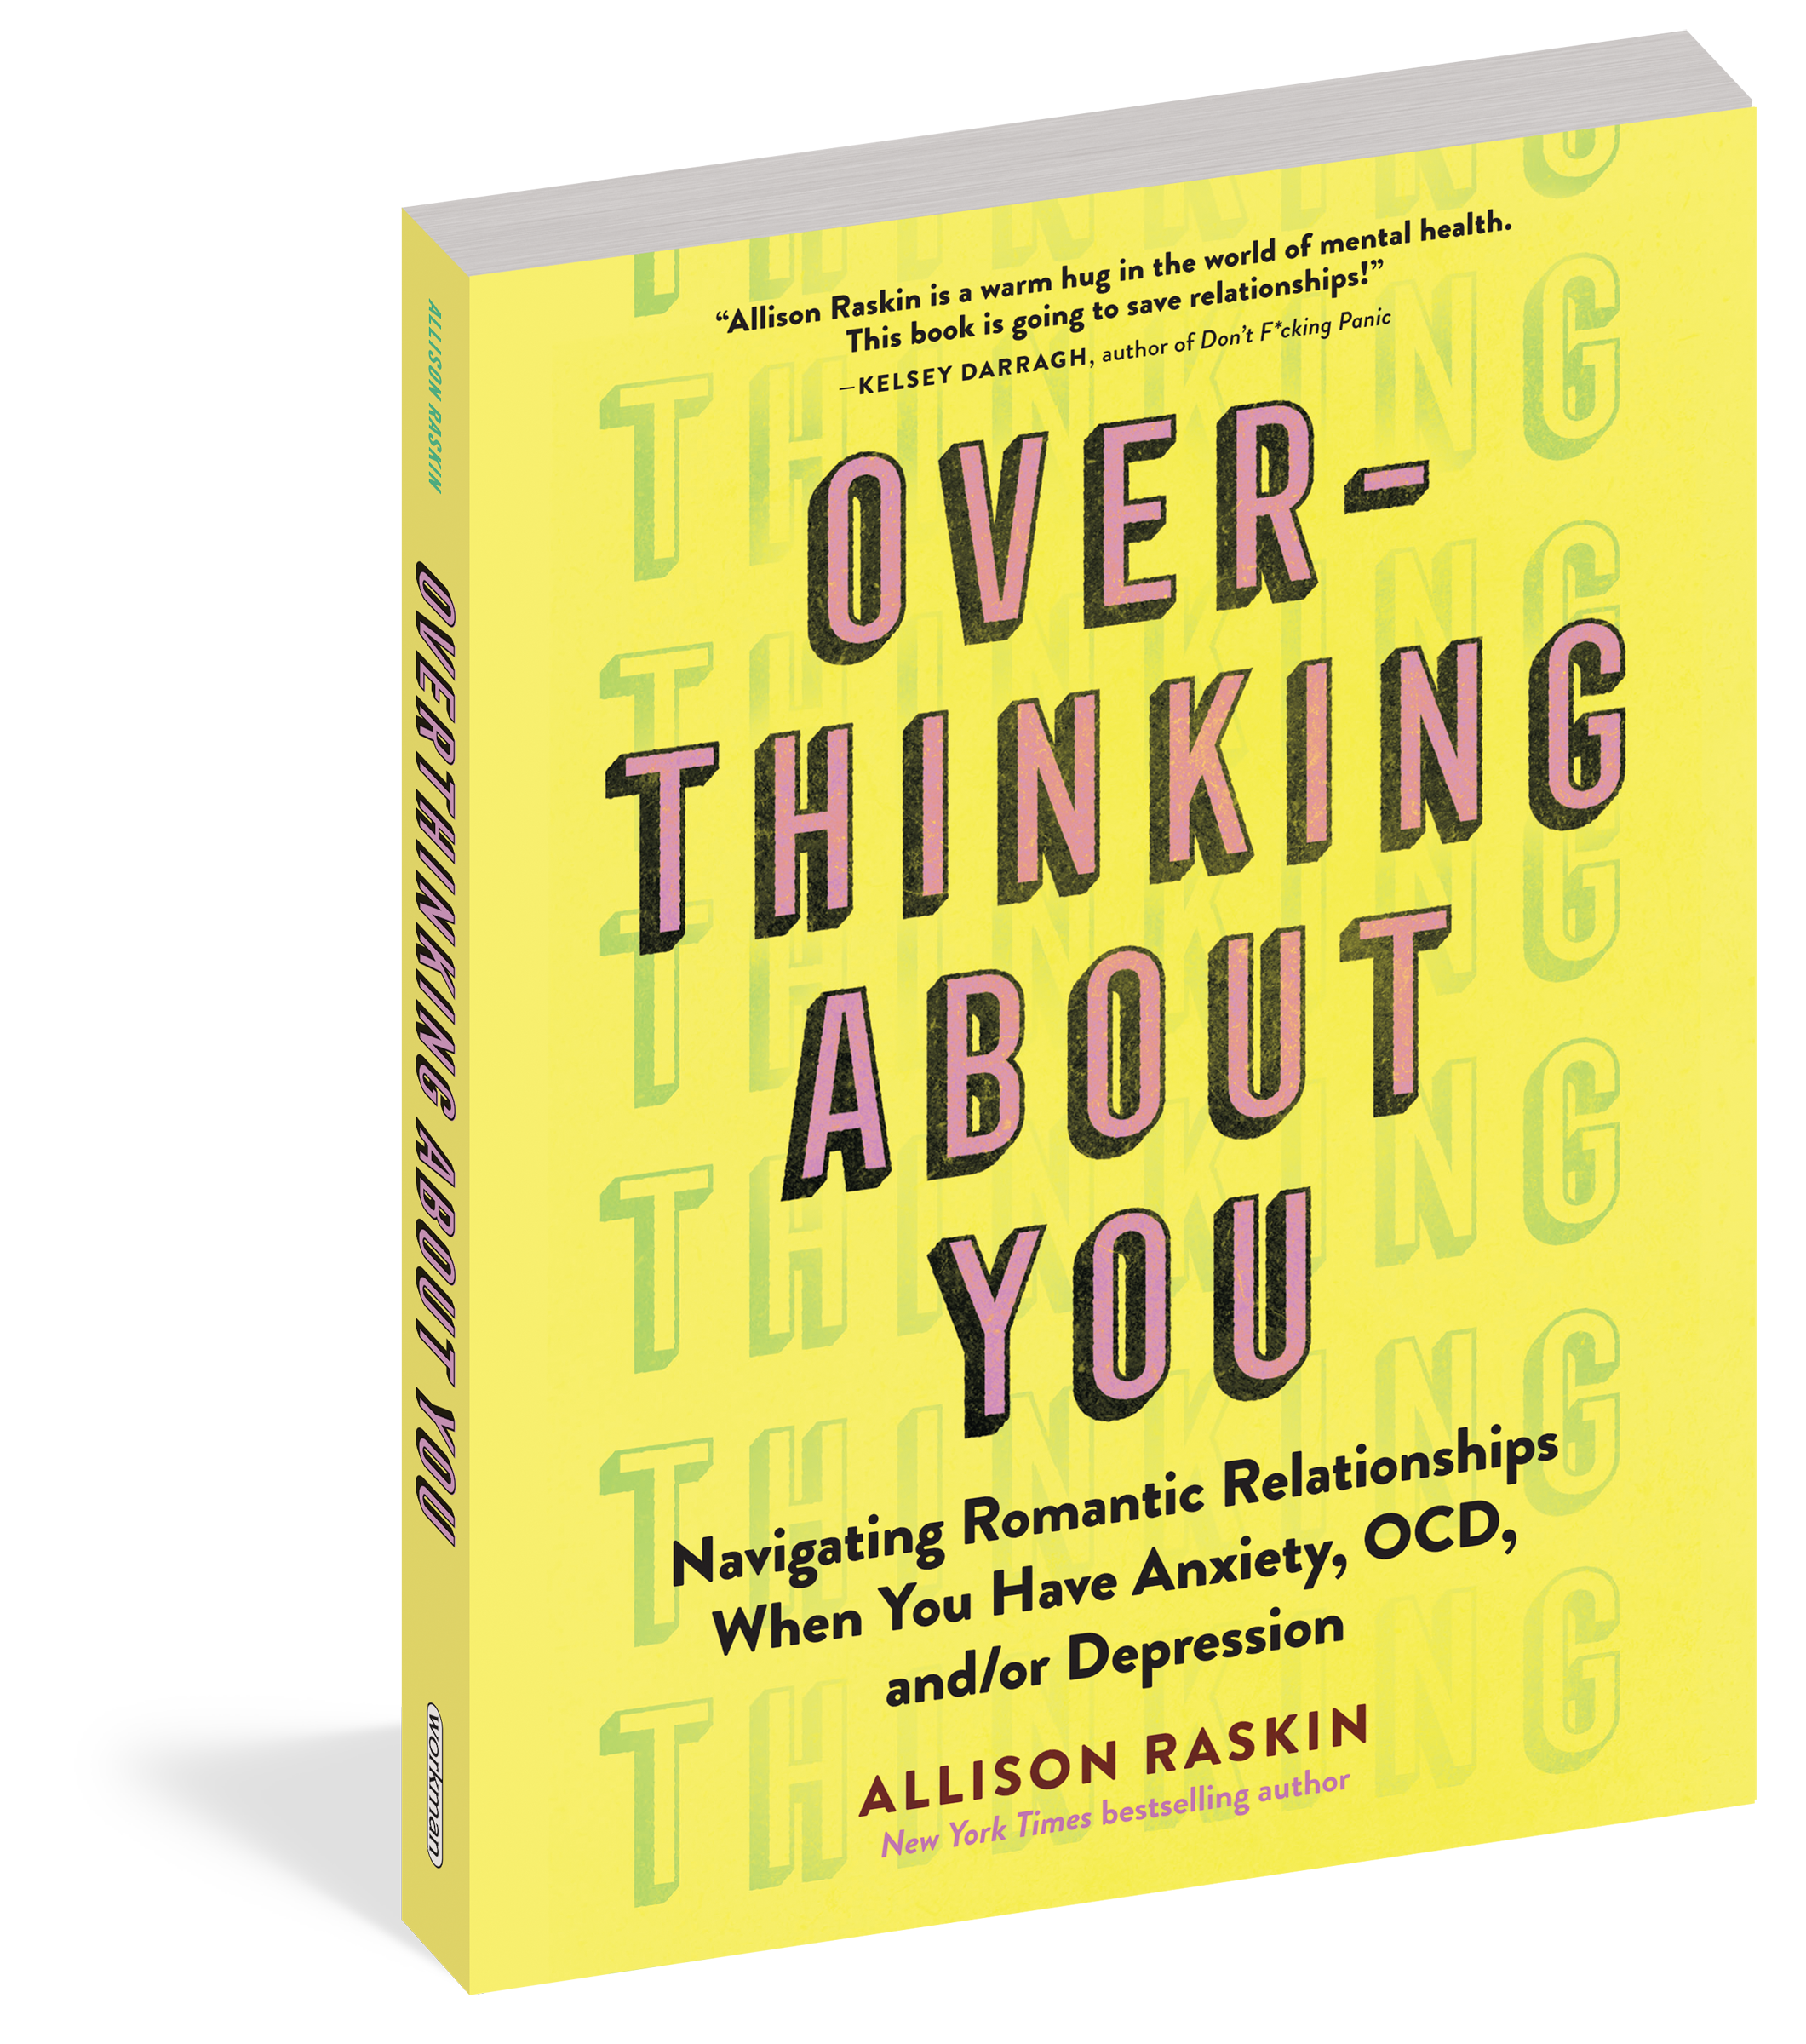 Overthinking About You: Navigating romantic relationships when you have anxiety, OCD, and/or depression